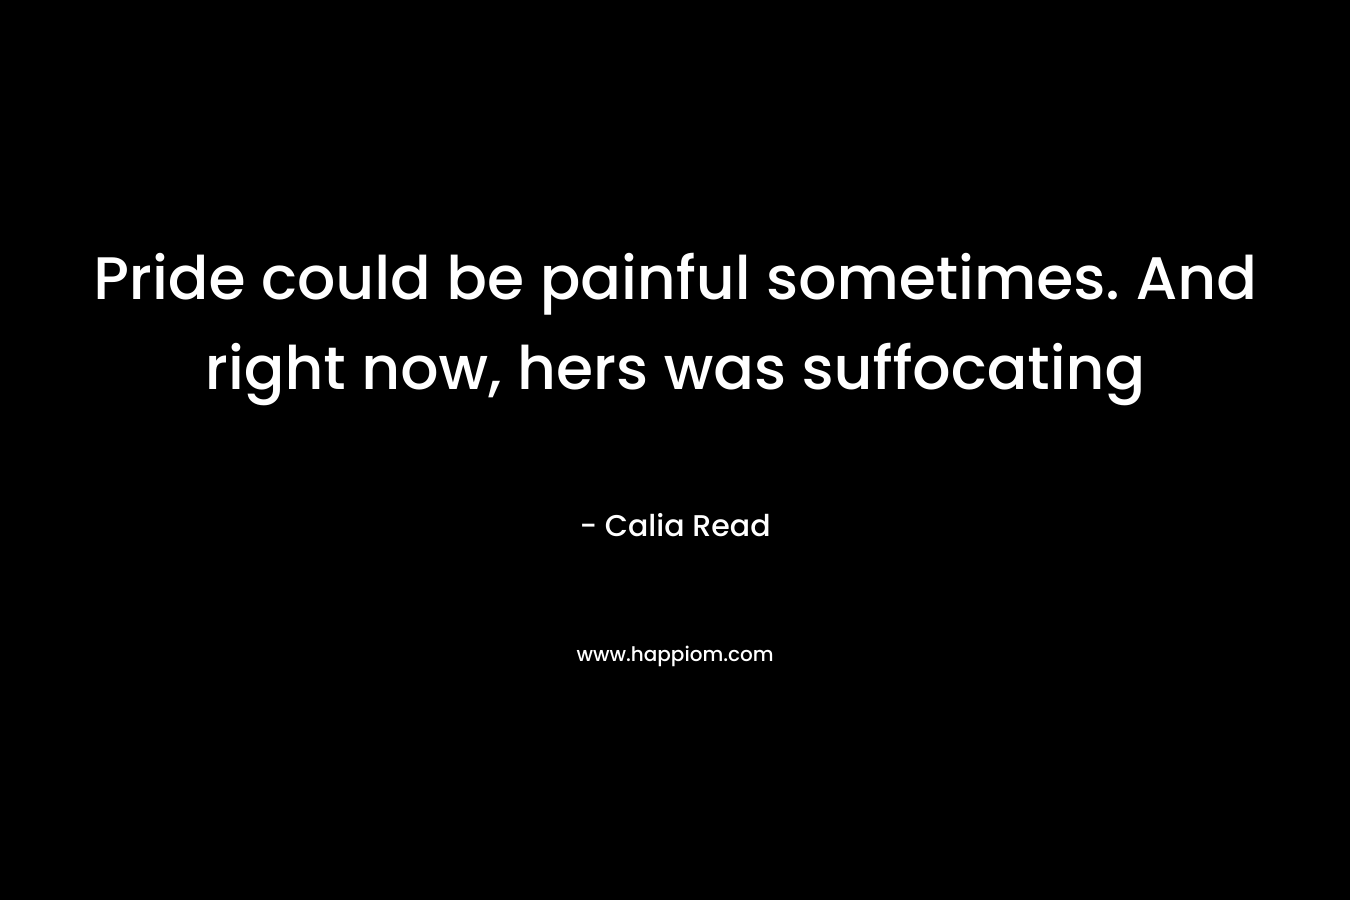 Pride could be painful sometimes. And right now, hers was suffocating – Calia Read